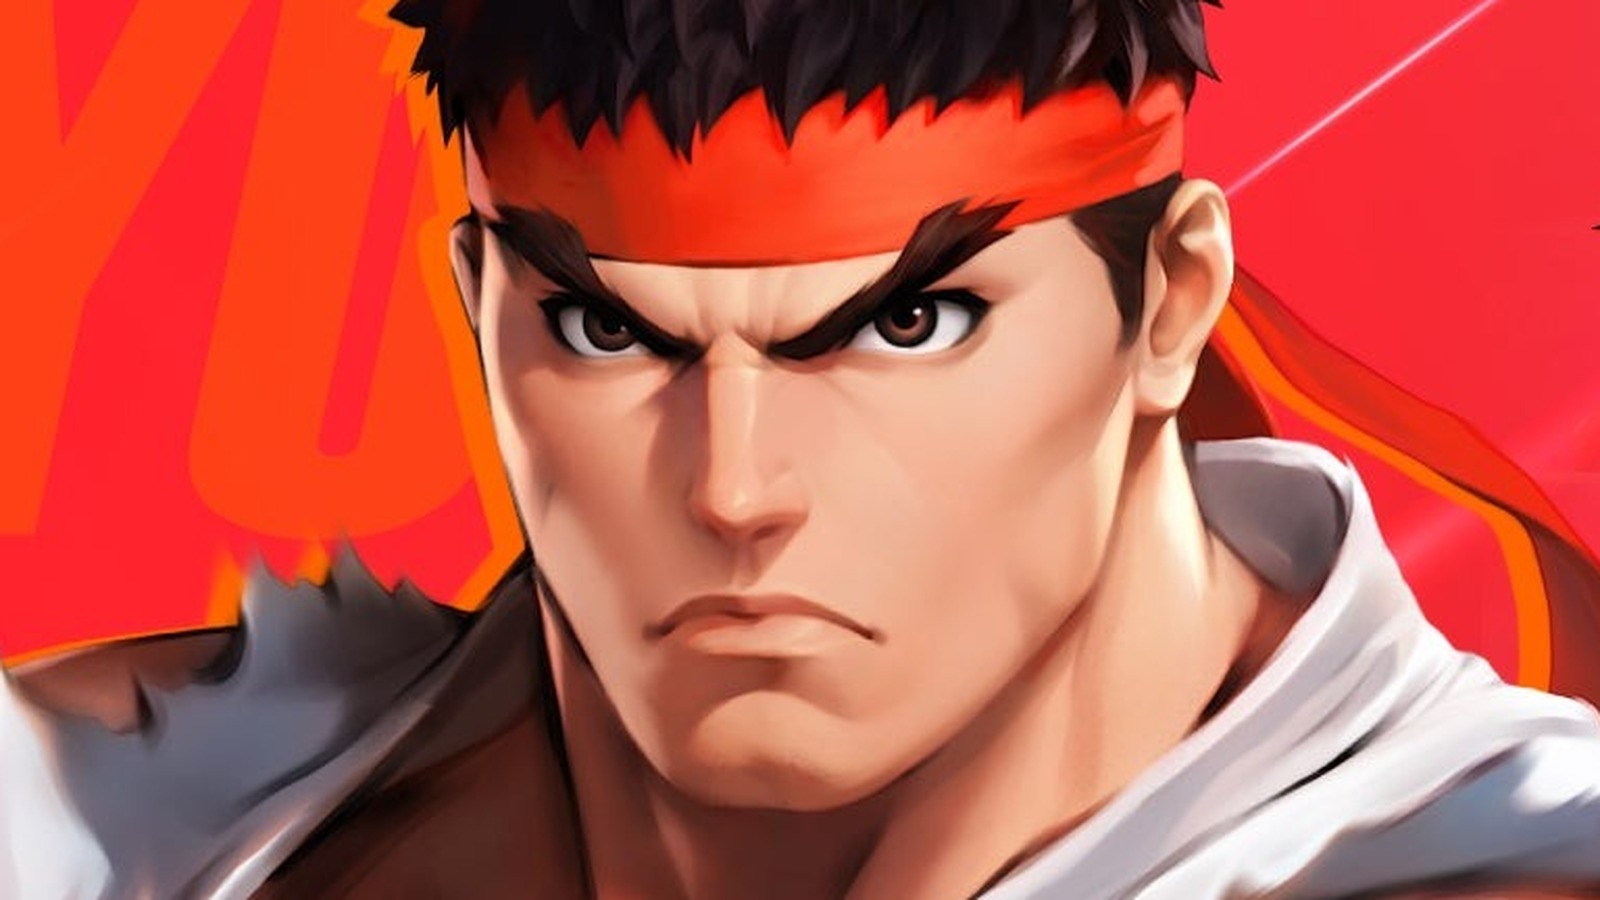 Crunchyroll And Capcom Announce 'STREET FIGHTER DUEL